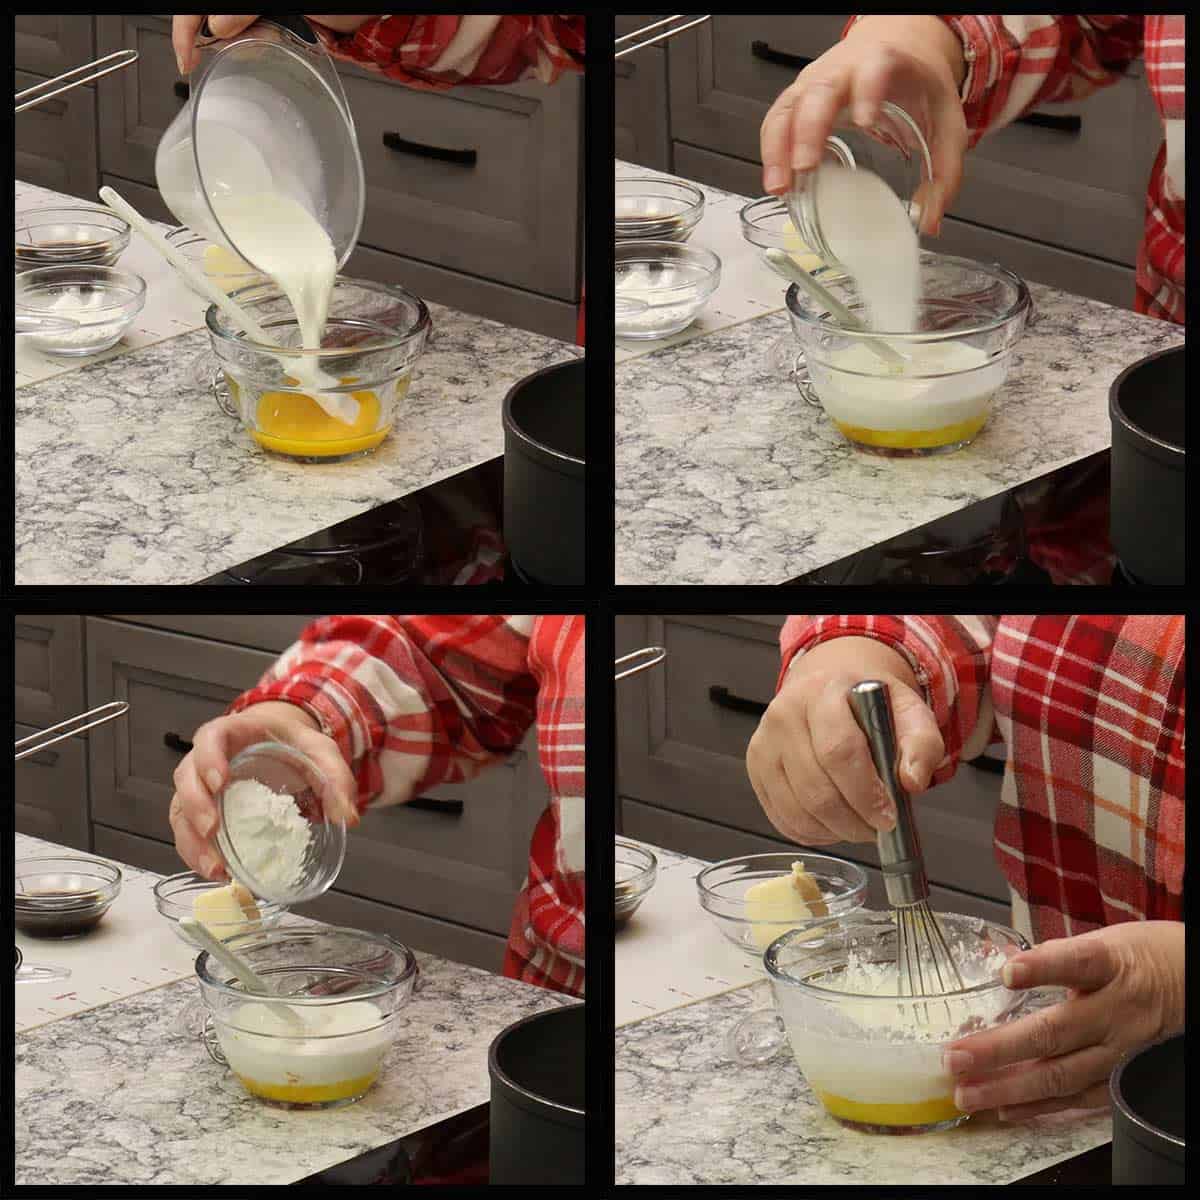 mixing the sugar, milk, and cornstarch into the egg yolks.